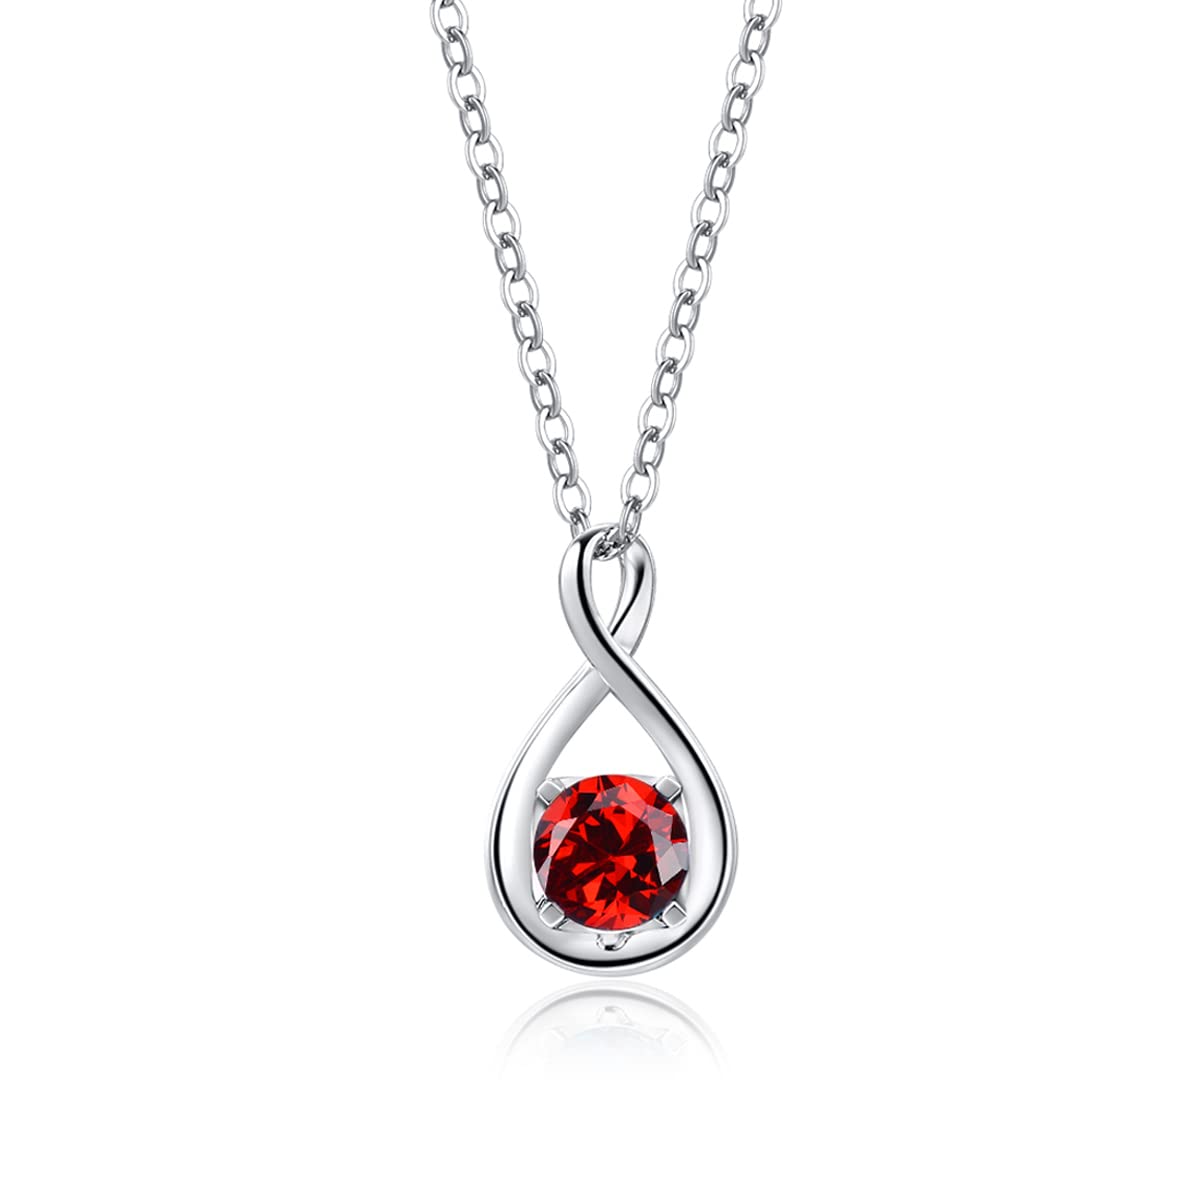 Infinity Pendant Necklace for Women with Birthstone